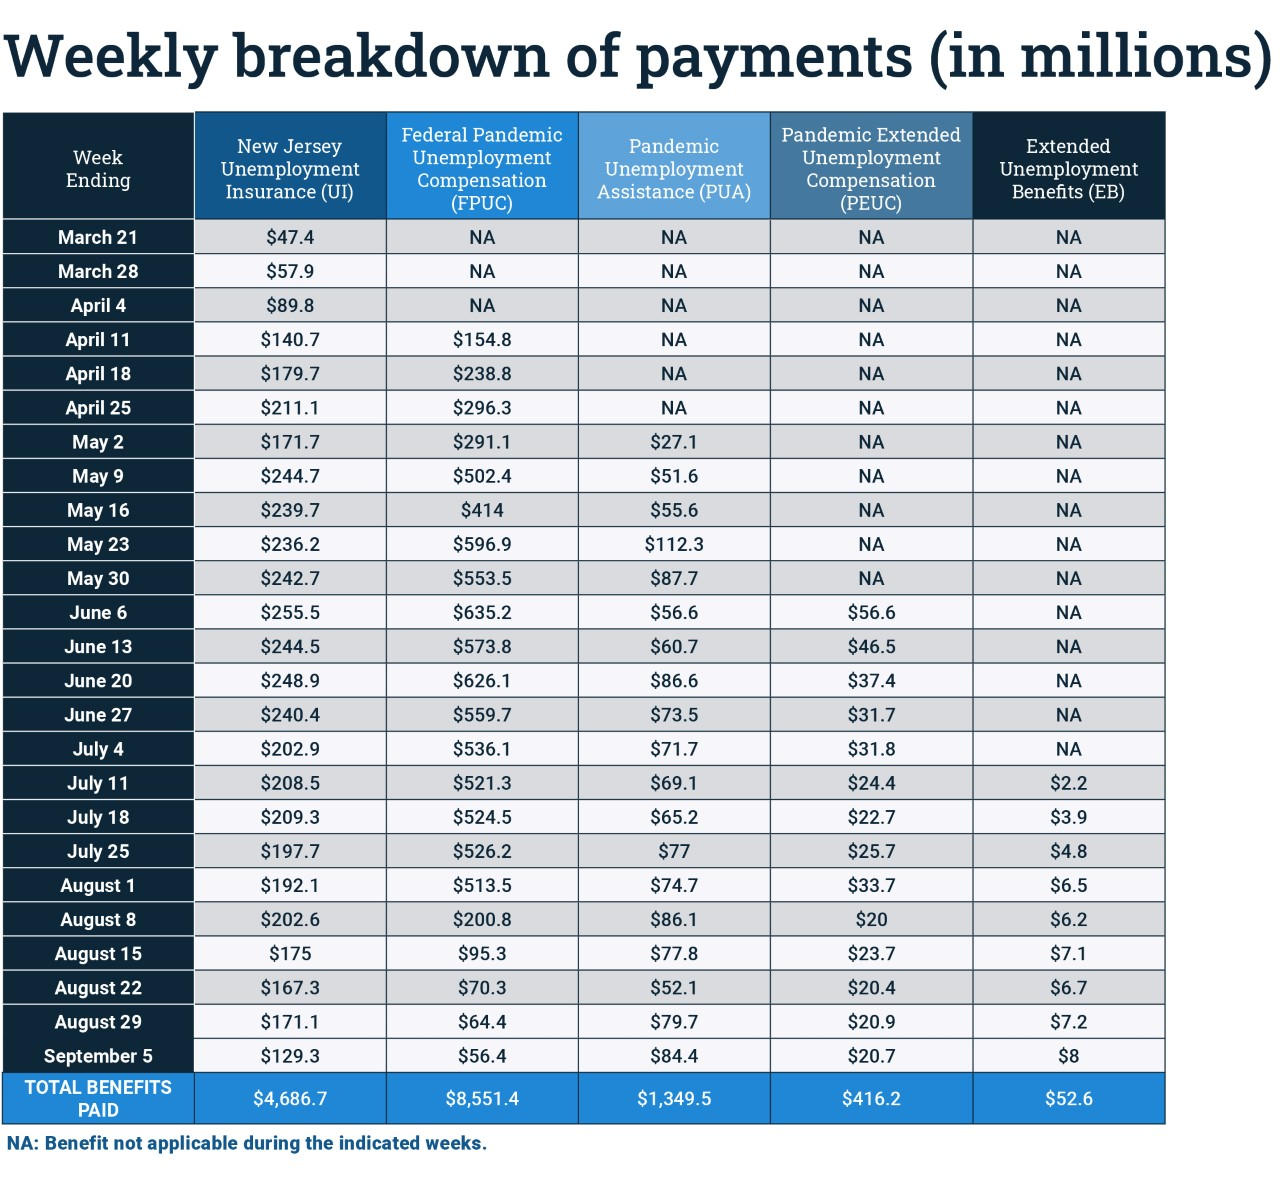 payment breakdown for the week of Sep 10, 2020